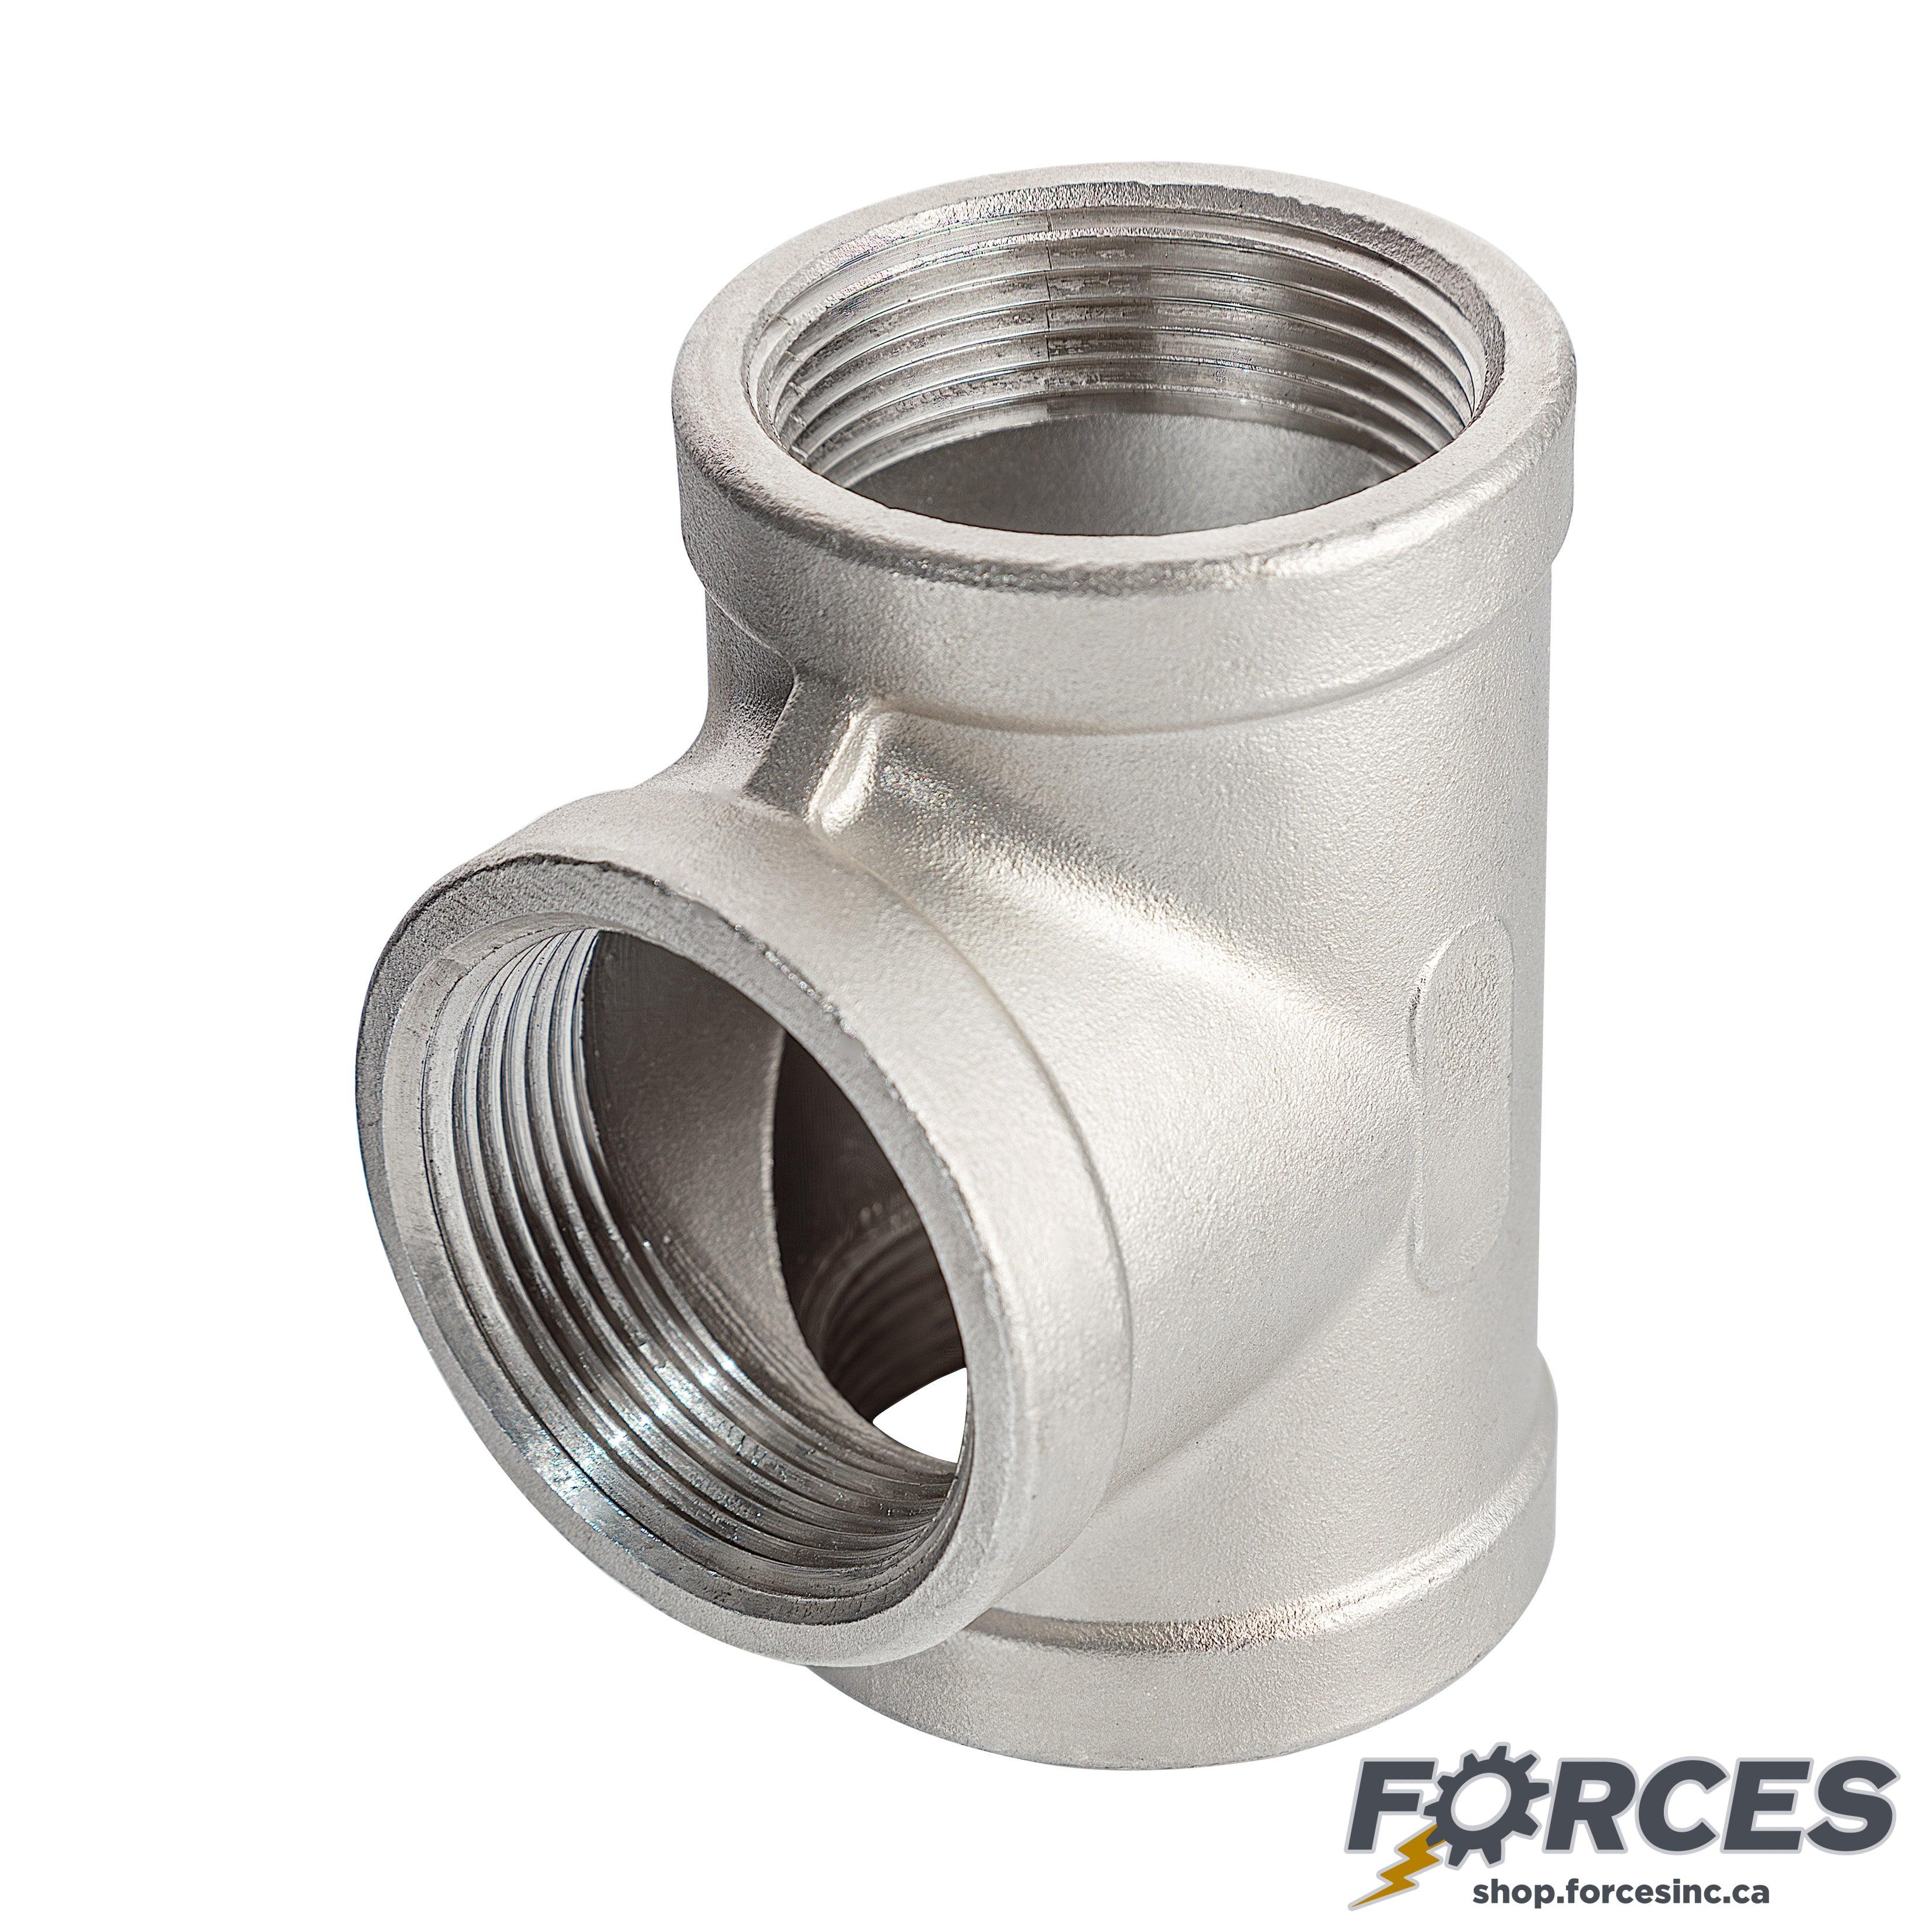 1" Tee NPT #150 - Stainless Steel 316 - Forces Inc